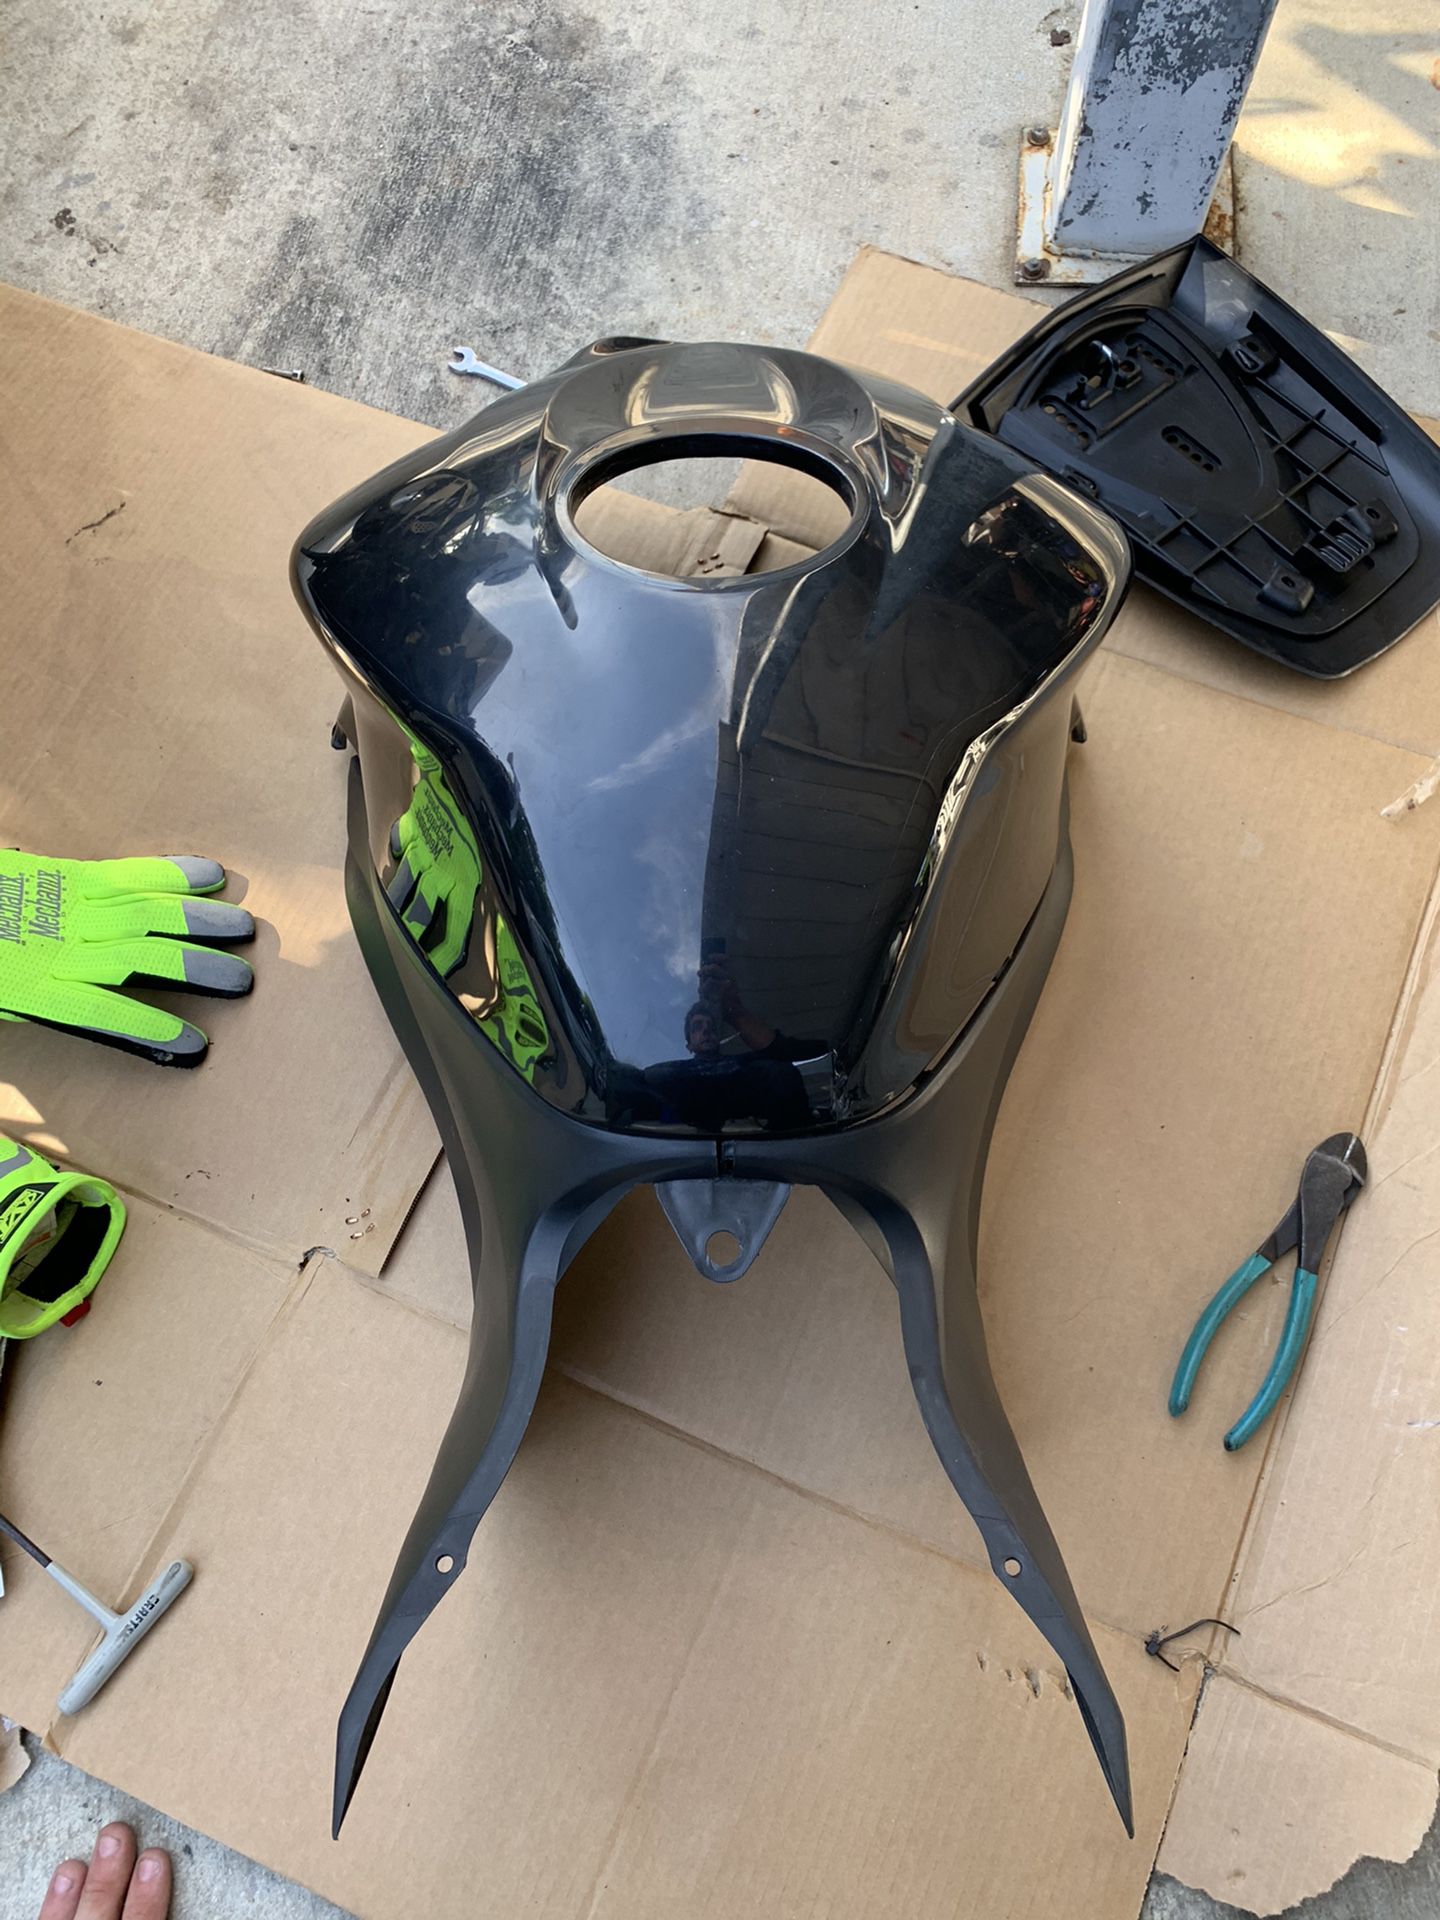 Honda fairing for gas tank with side plastic